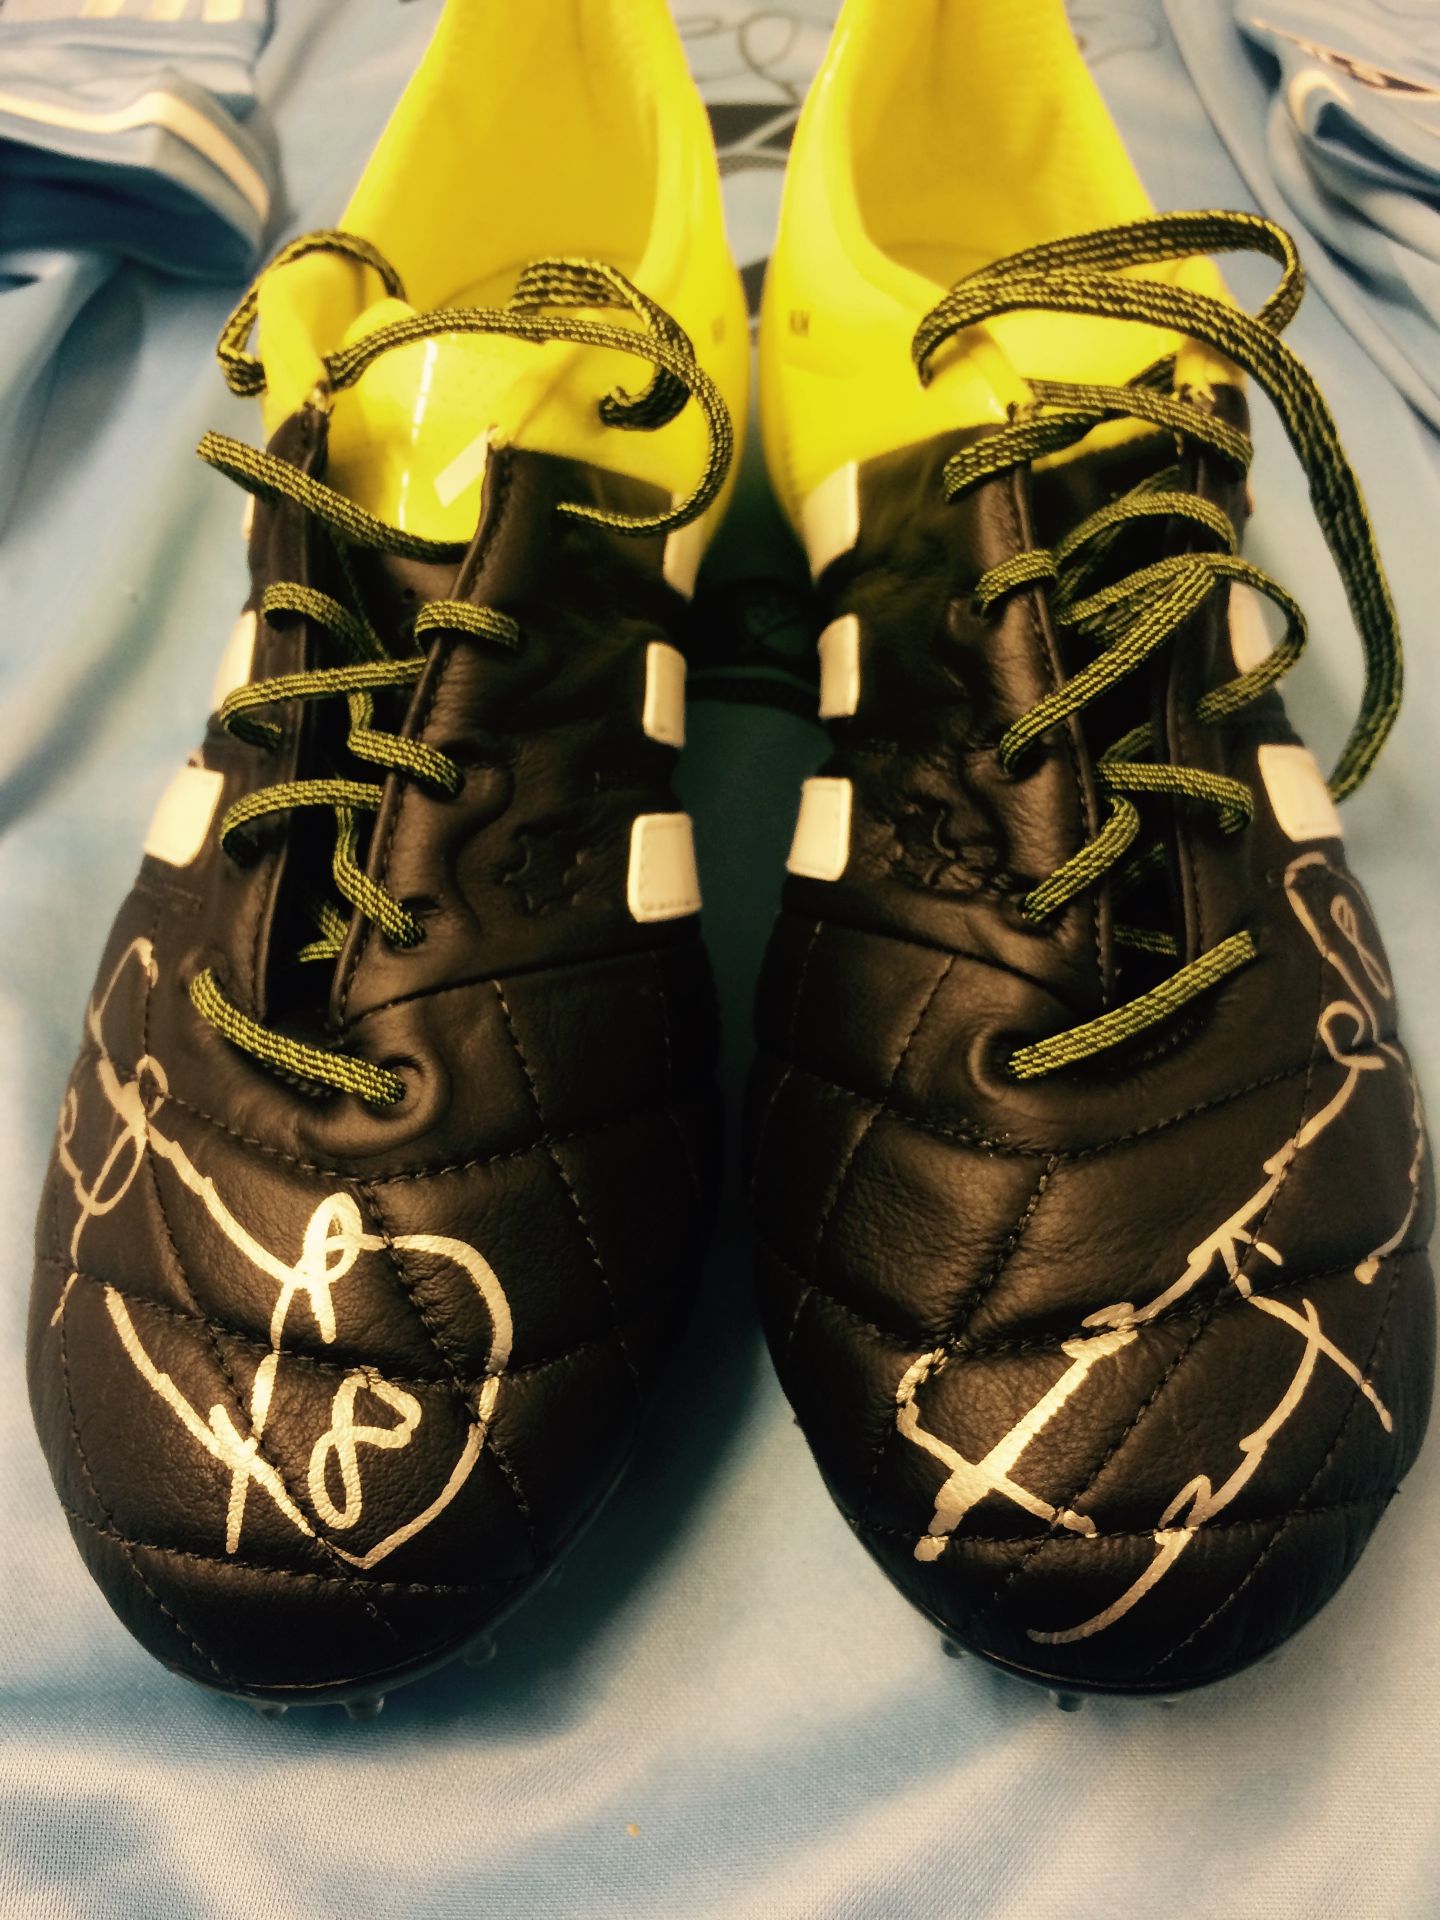 Football Legend Frank Lampard personally donates a signed shirt & boots - Image 4 of 12